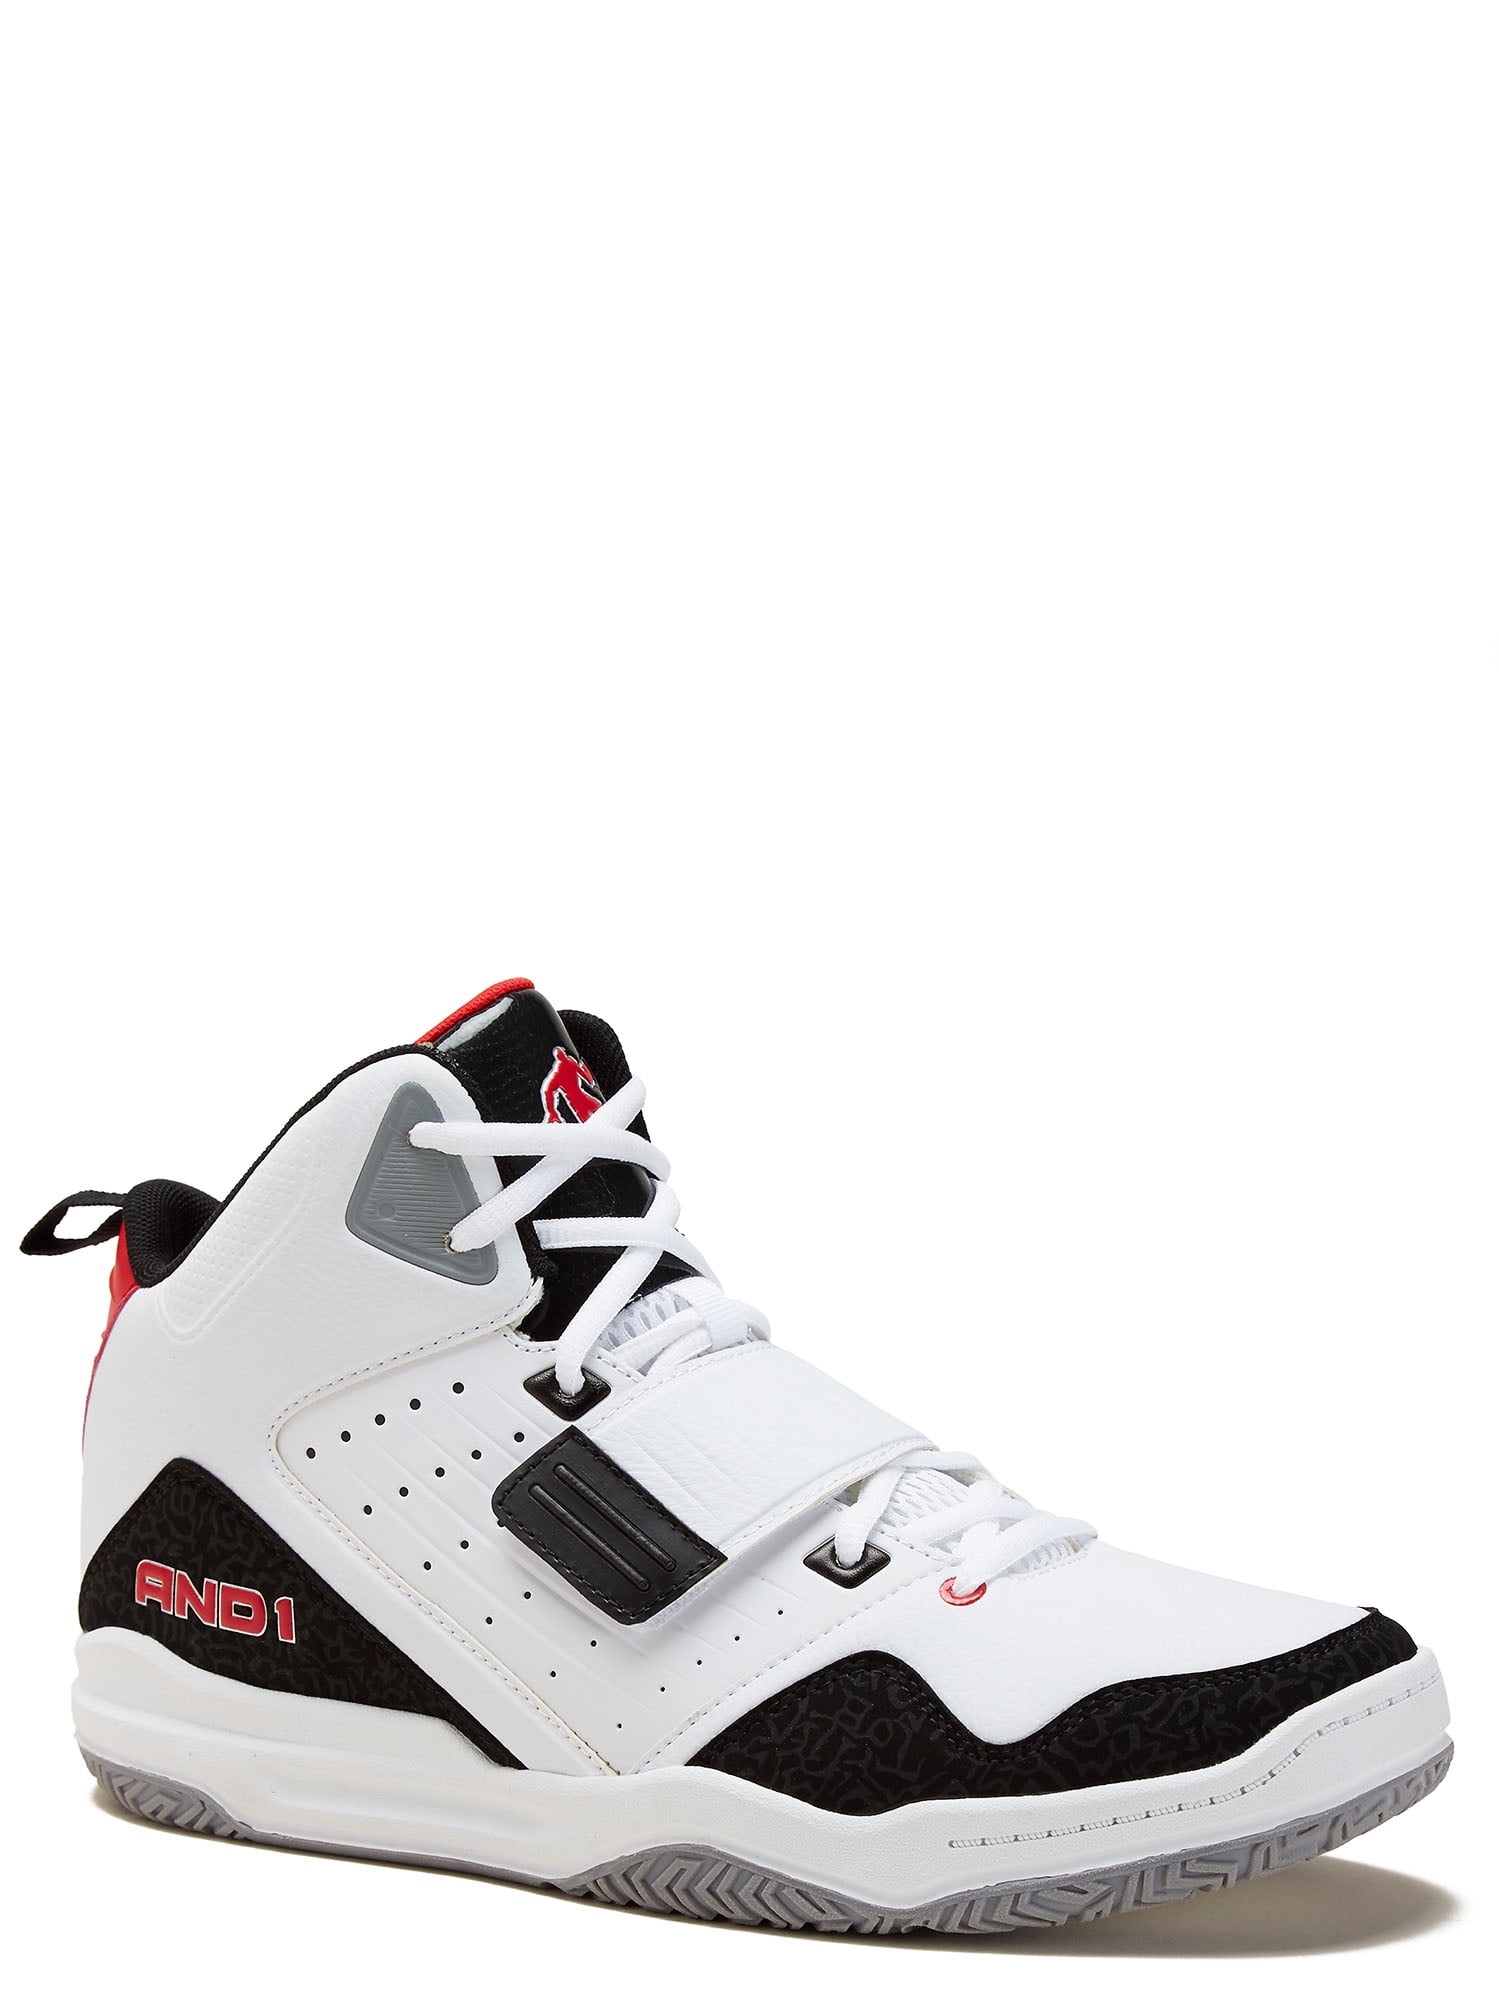 Capital 3.0 Basketball Shoe with Strap 